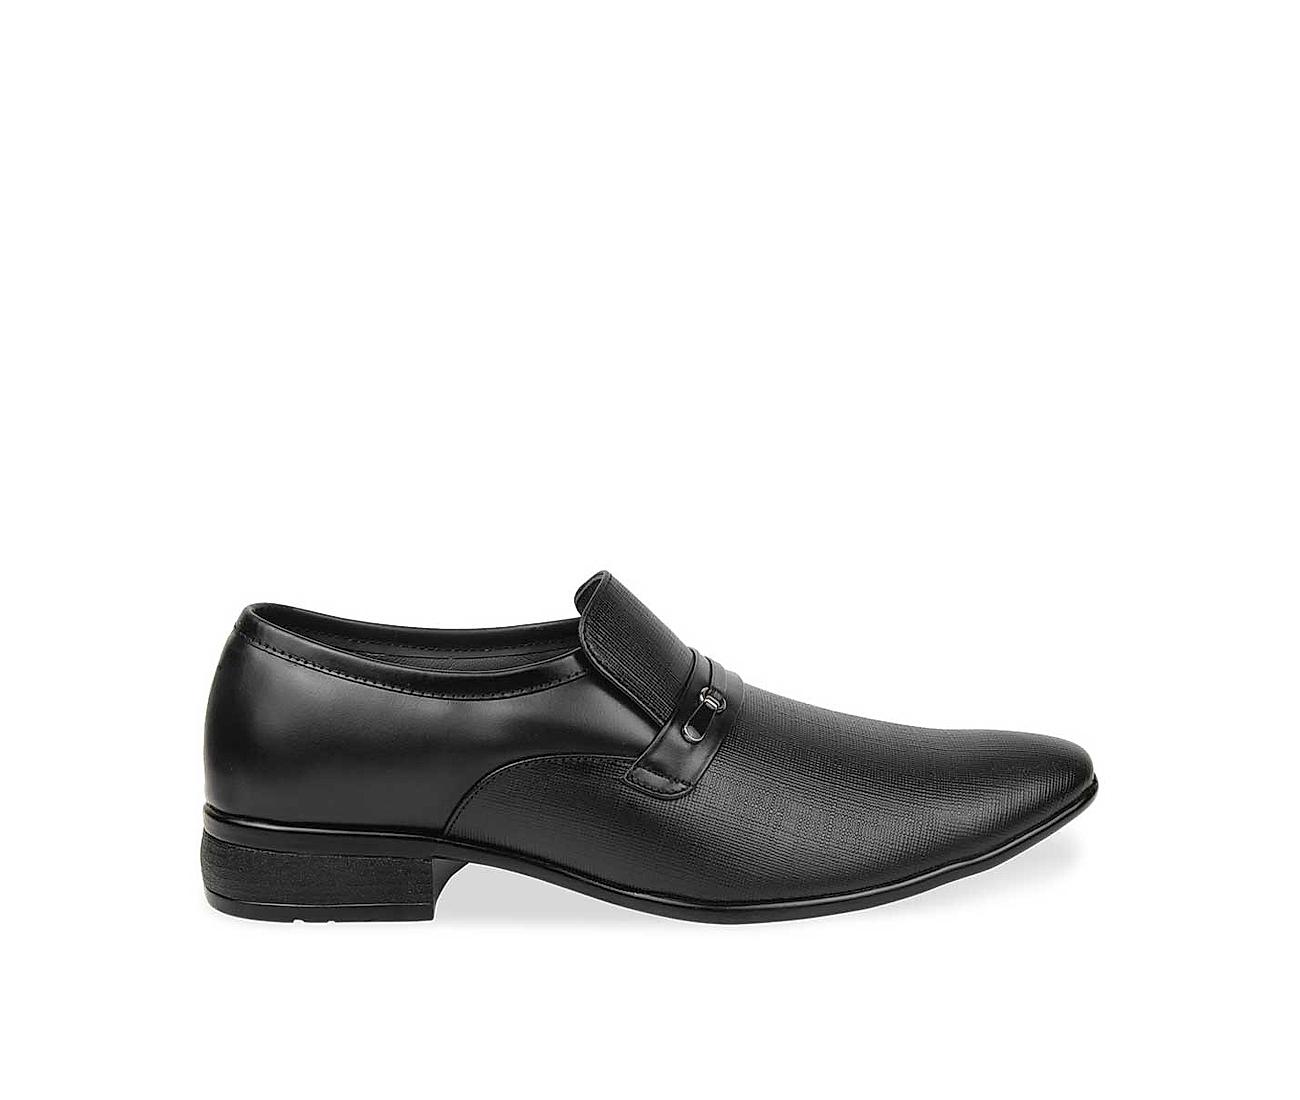 REGAL White Mens Formal Leather Slip On Shoes : Amazon.in: Shoes & Handbags-happymobile.vn